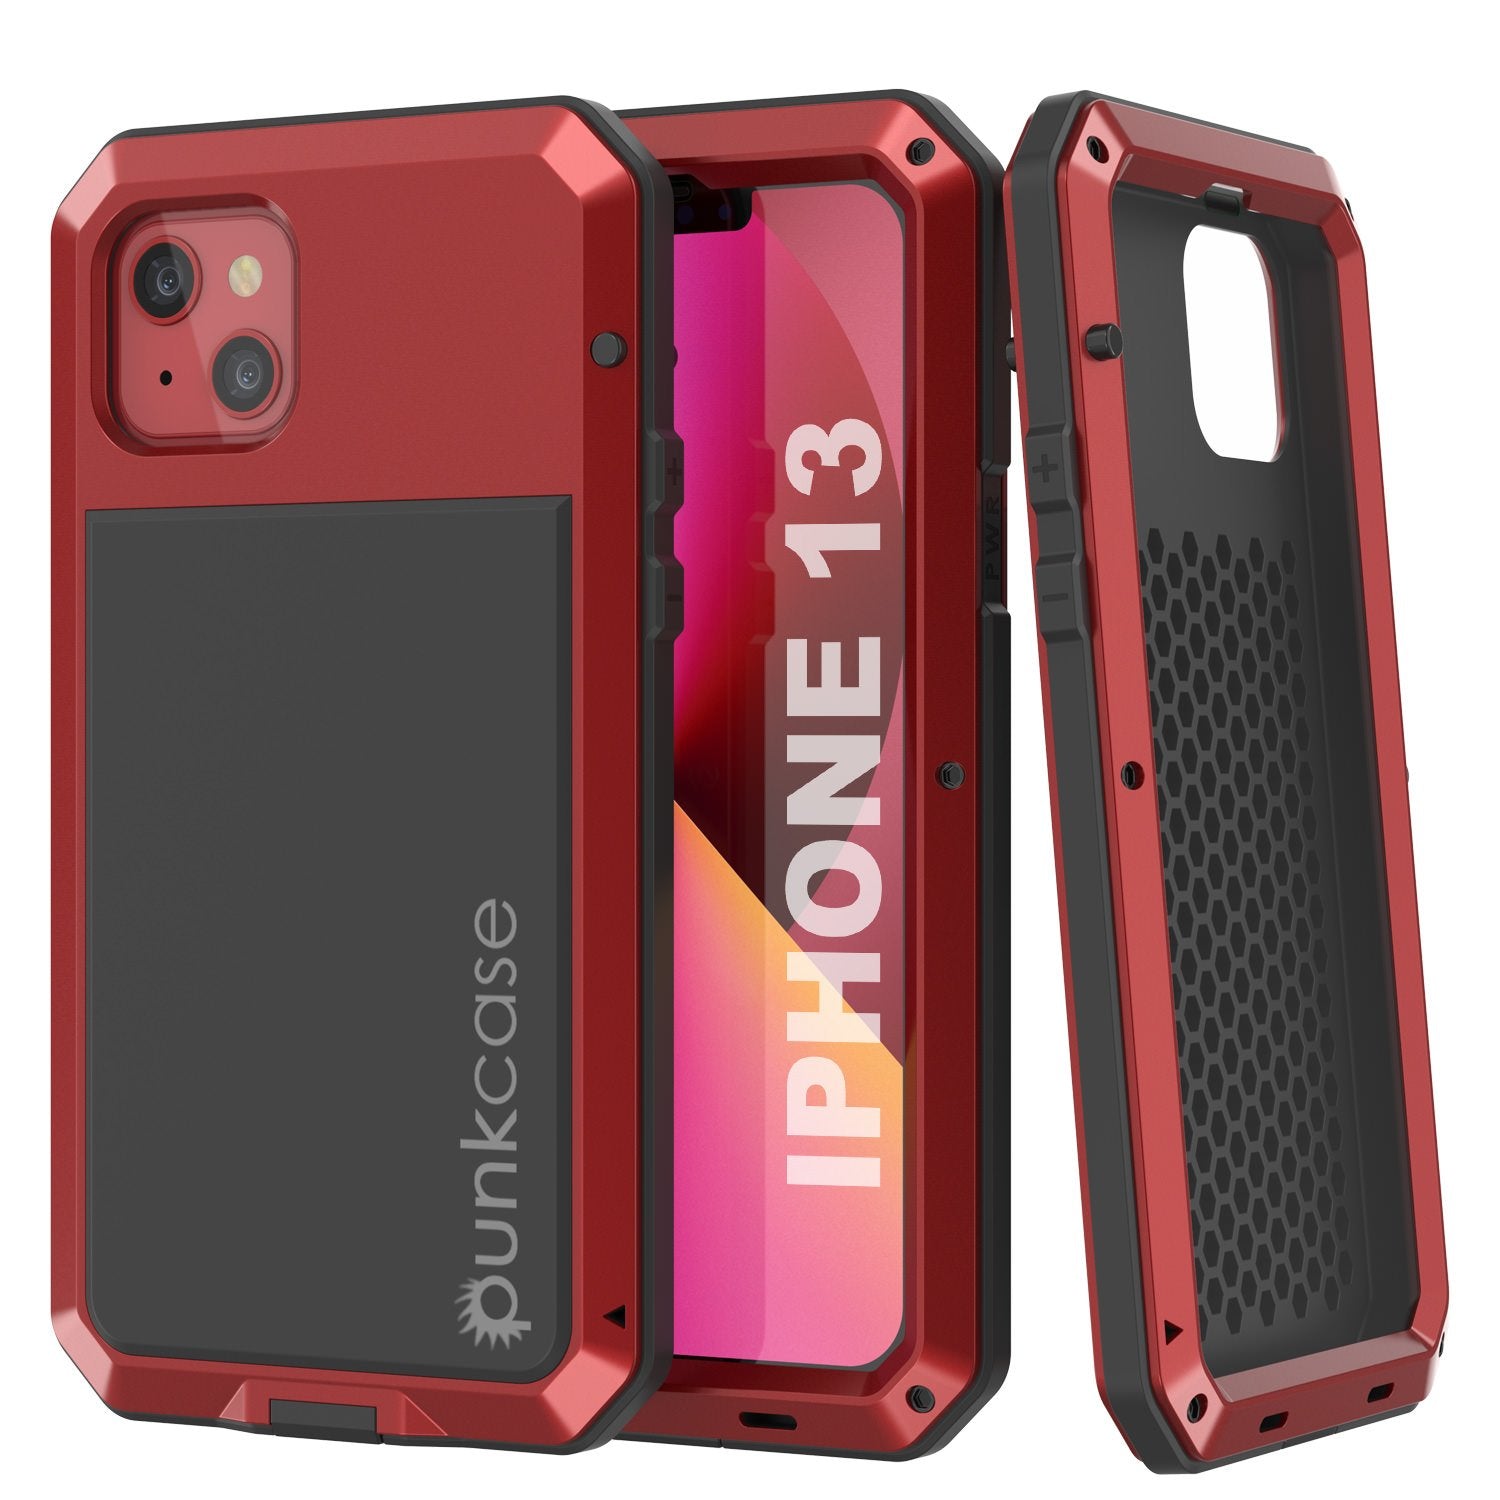 iPhone 13 Metal Case, Heavy Duty Military Grade Armor Cover [shock proof] Full Body Hard [Red] (Color in image: Red)